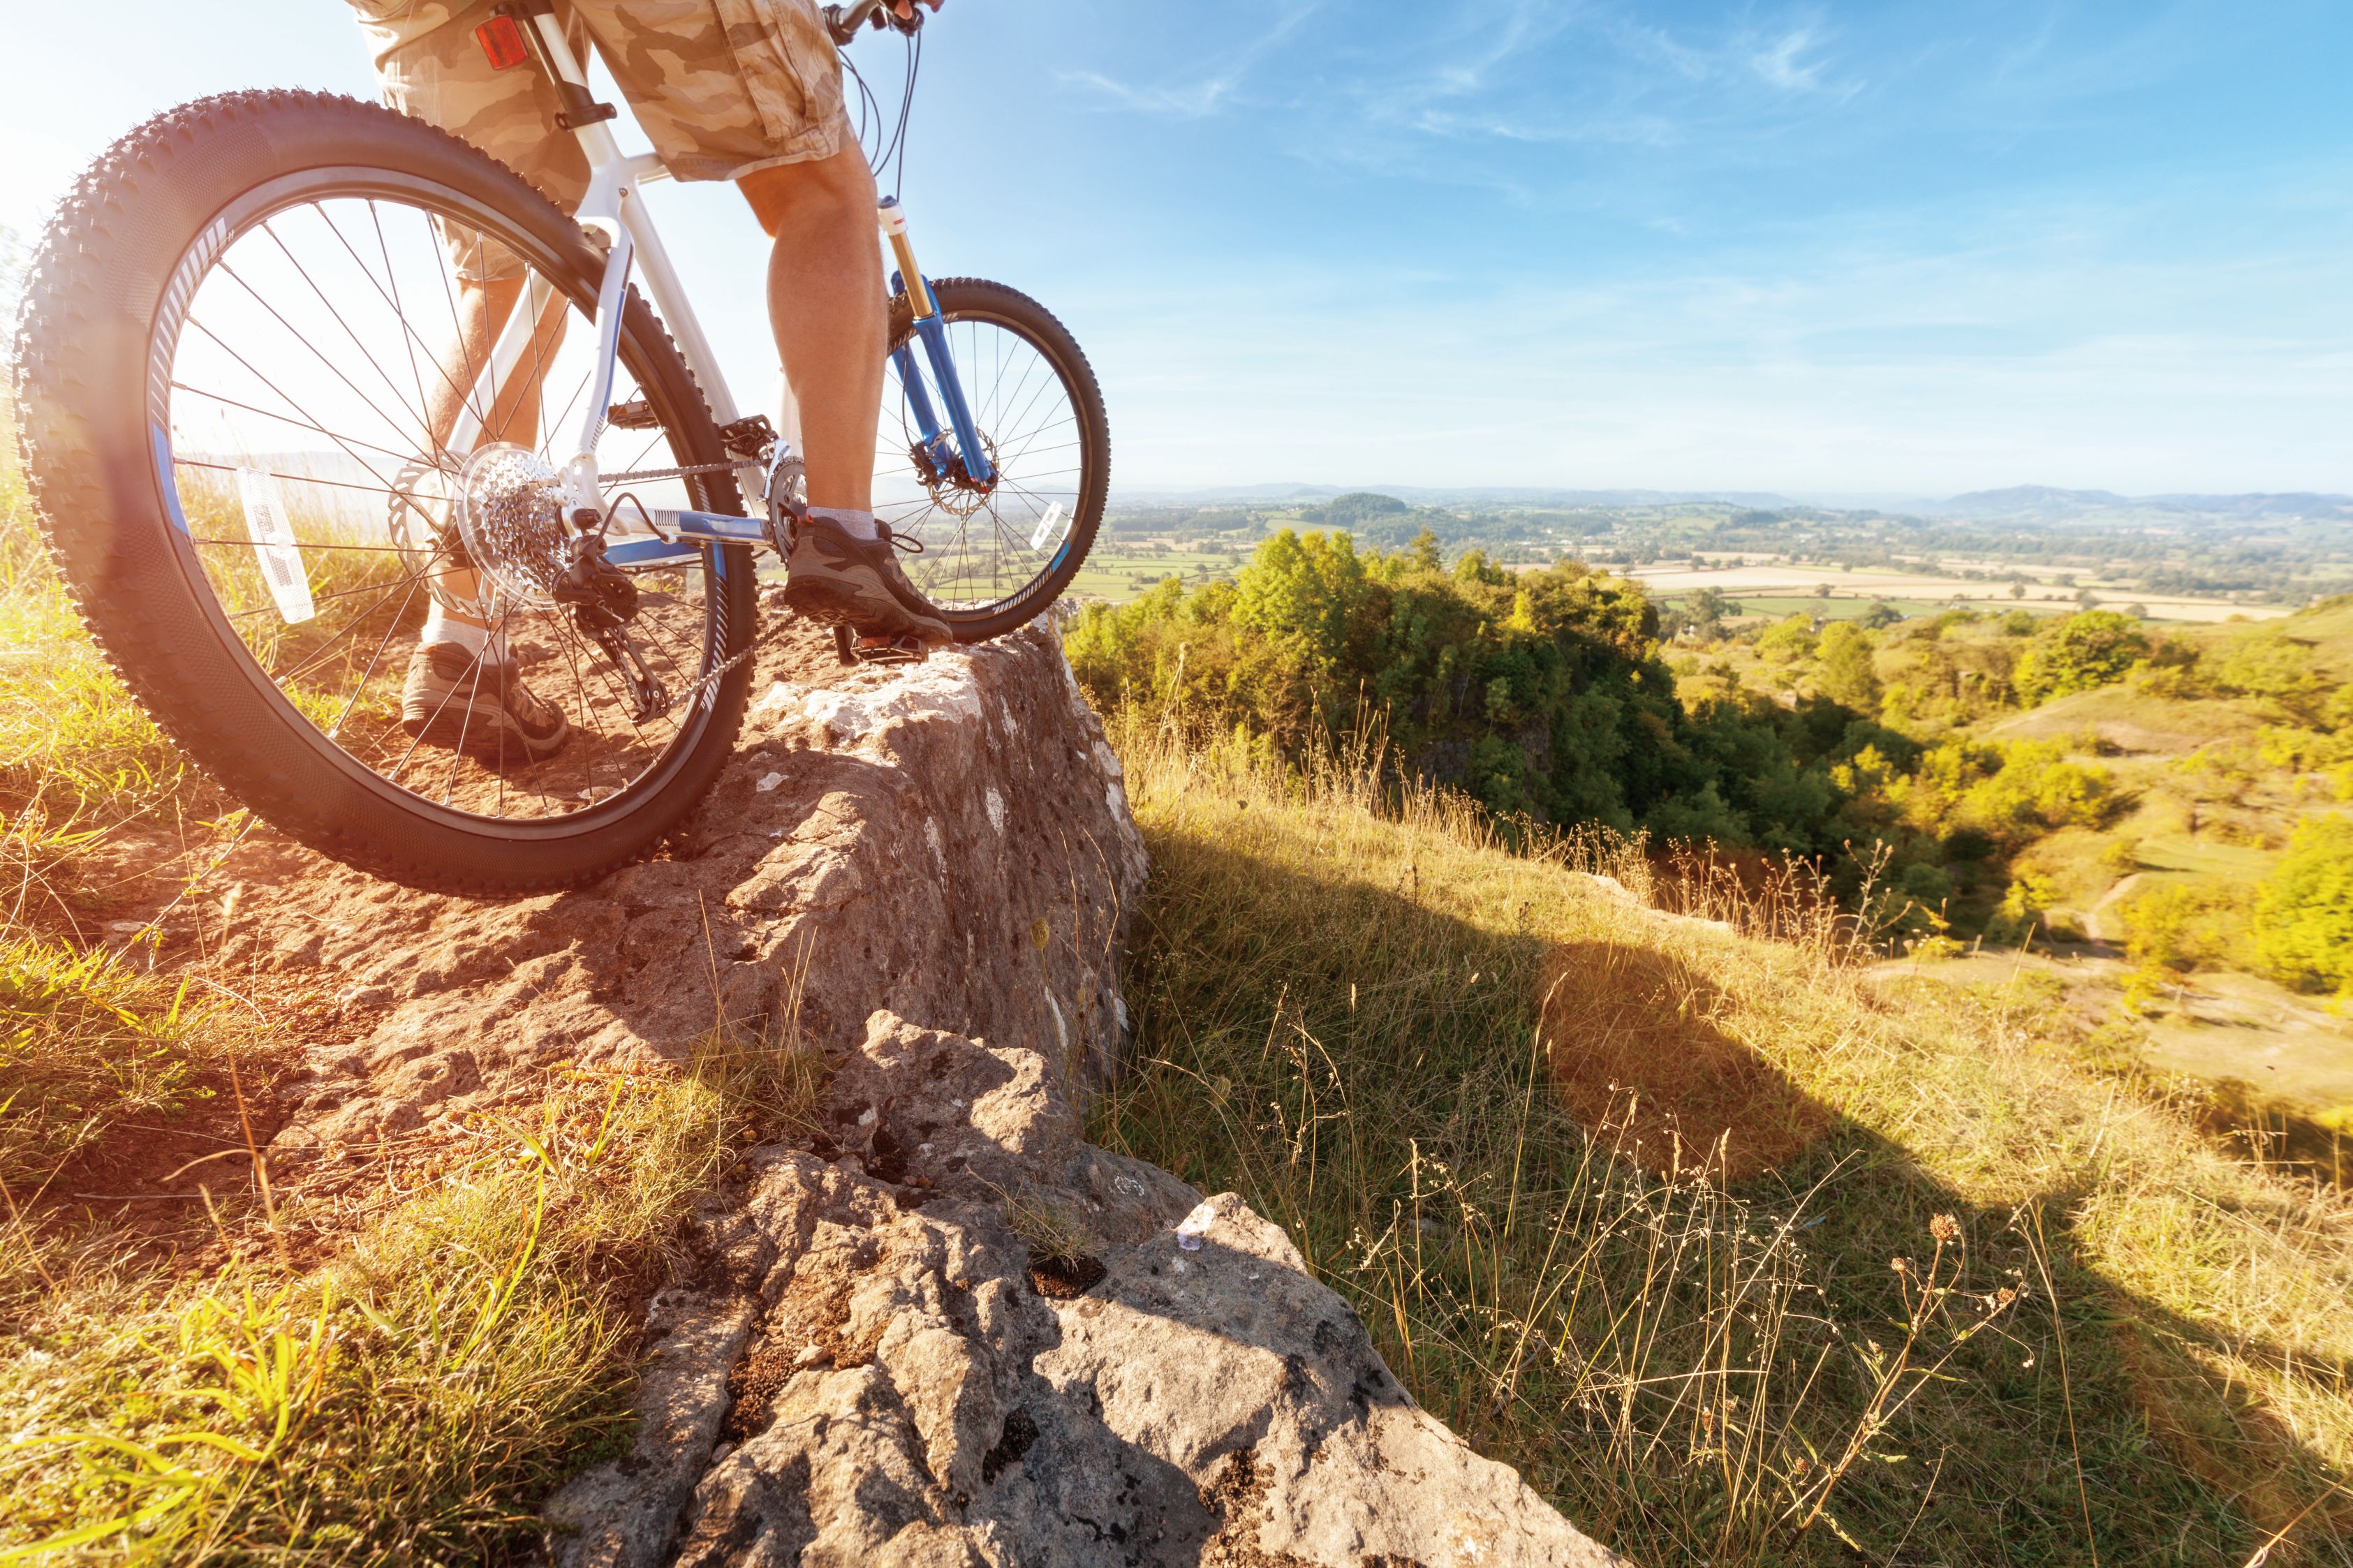 Mountain biker in action on rocks looking at downhill trail against blue sky concept for healthy lifestyle, excercise and extreme sports